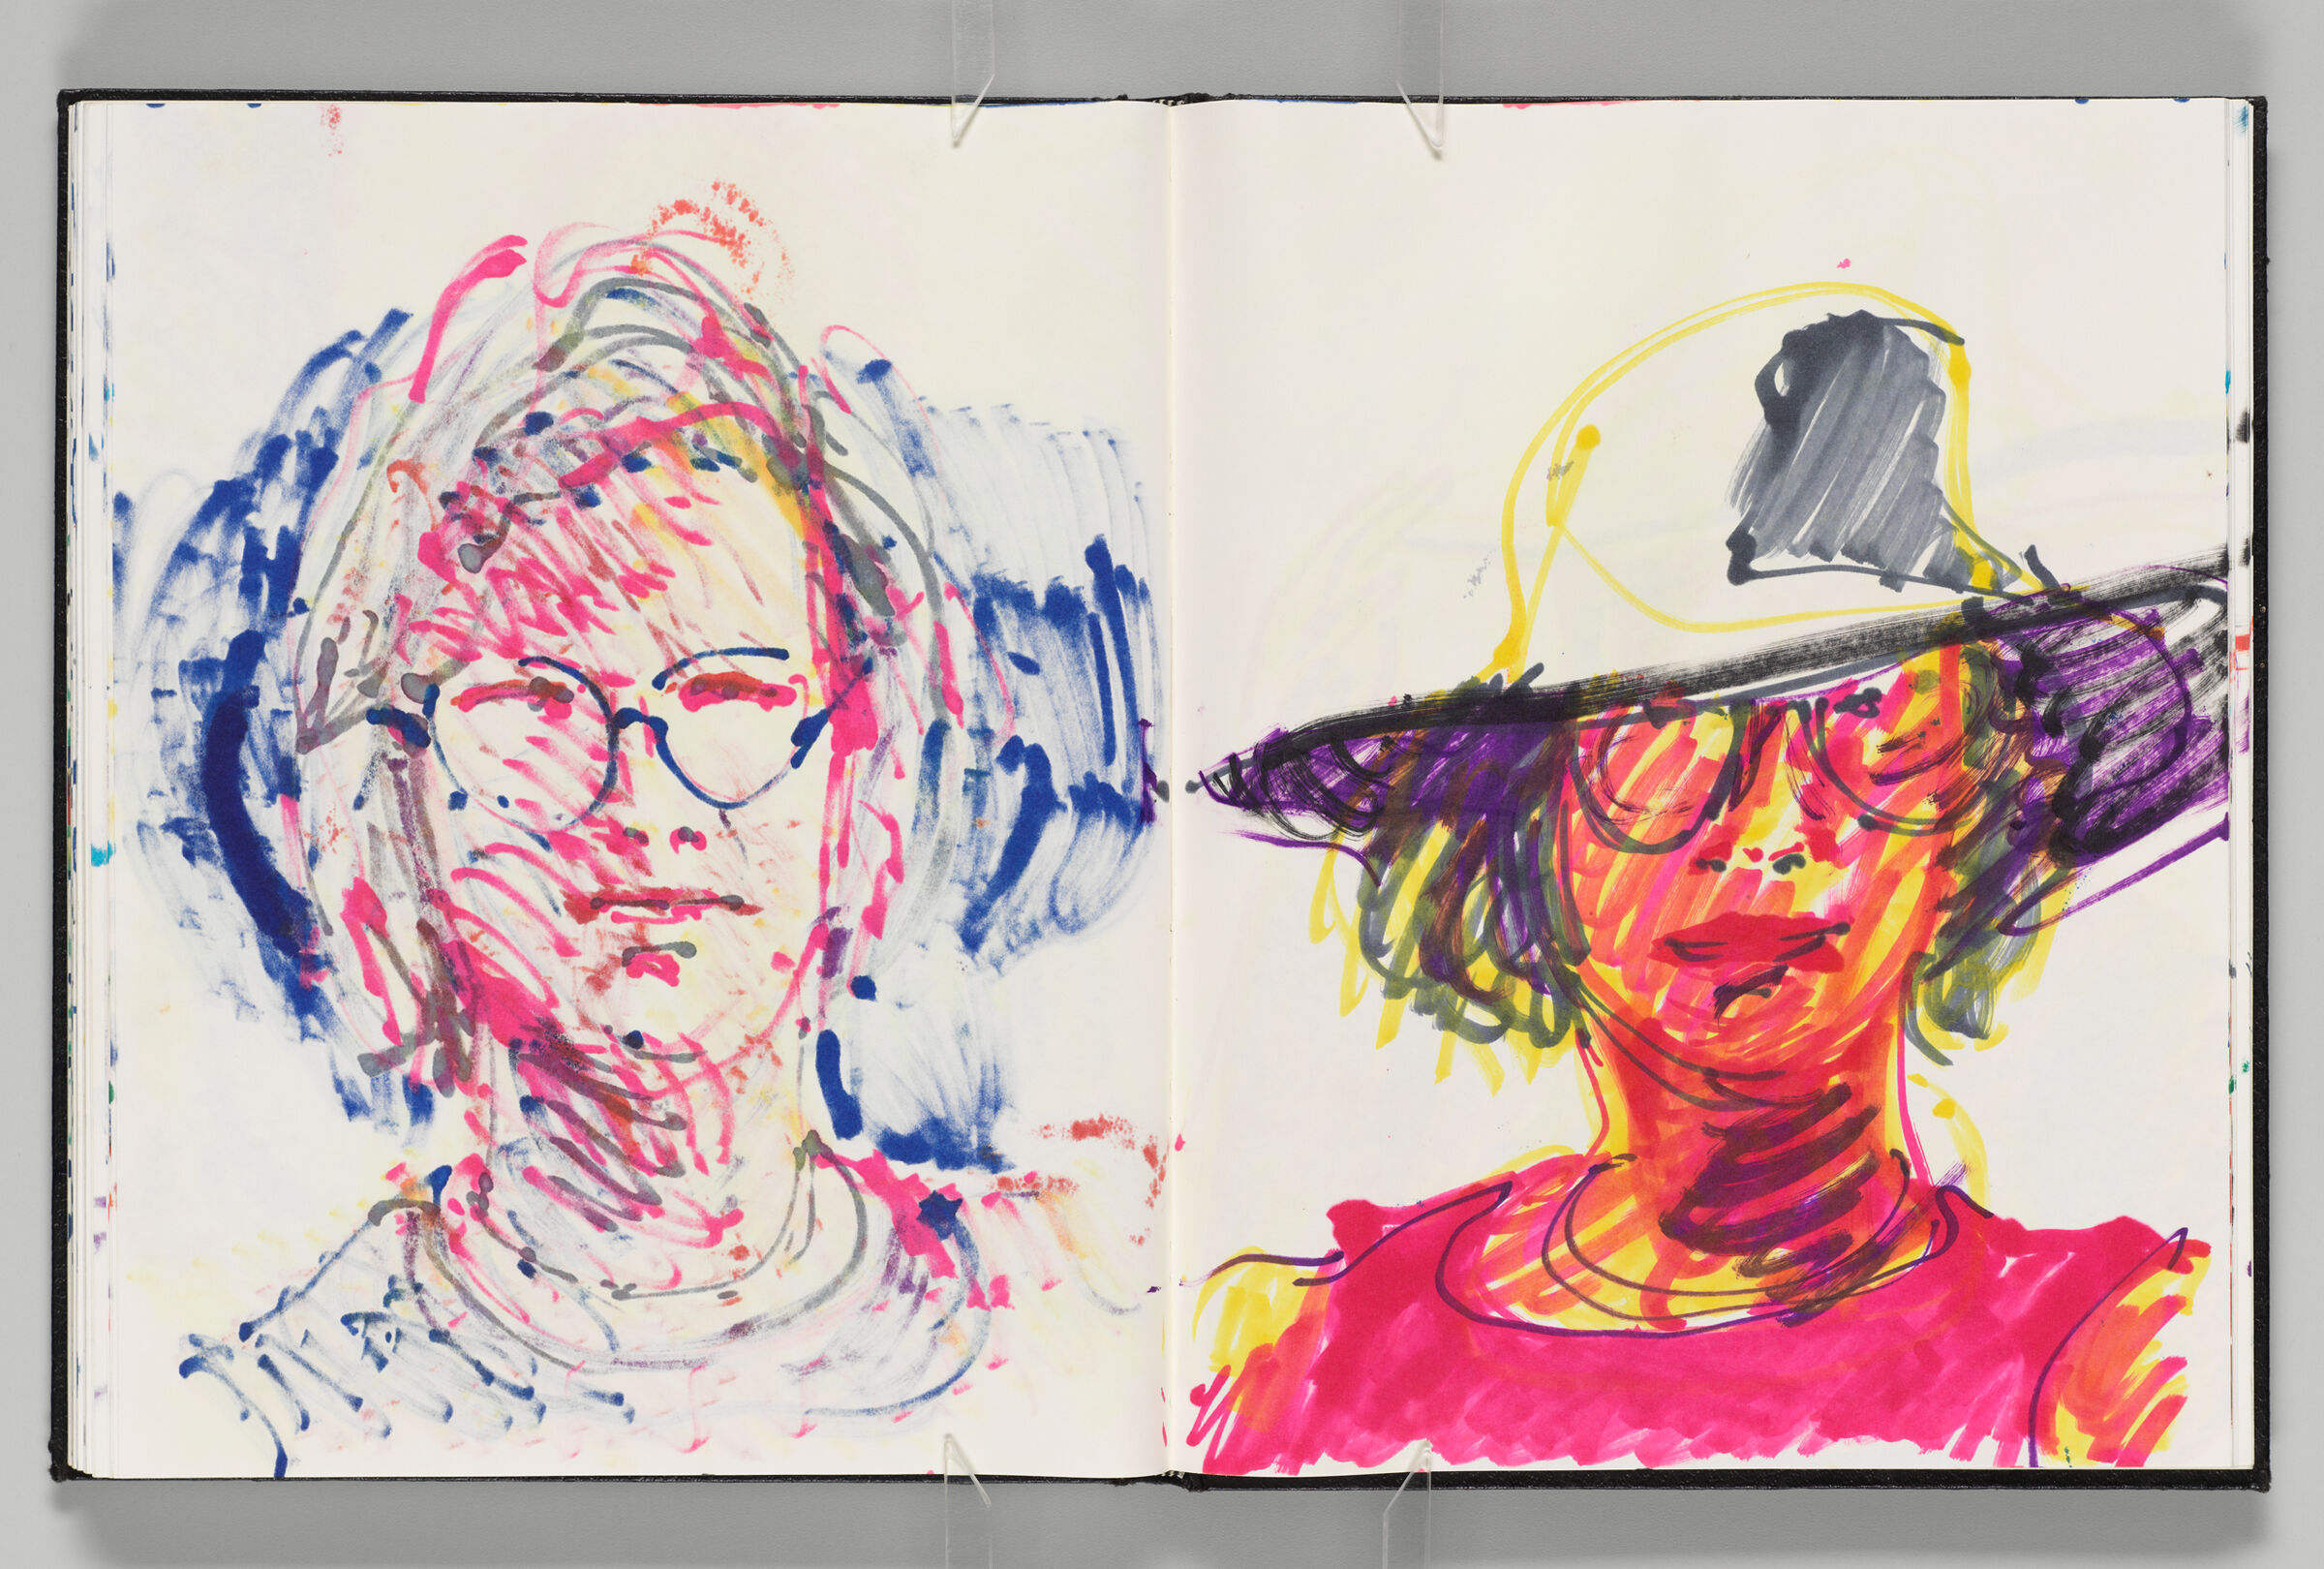 Untitled (Bleed-Through Of Previous Page, Left Page); Untitled (Frontal Portrait Of Female Figure In Hat And Glasses [Elizabeth], Right Page)